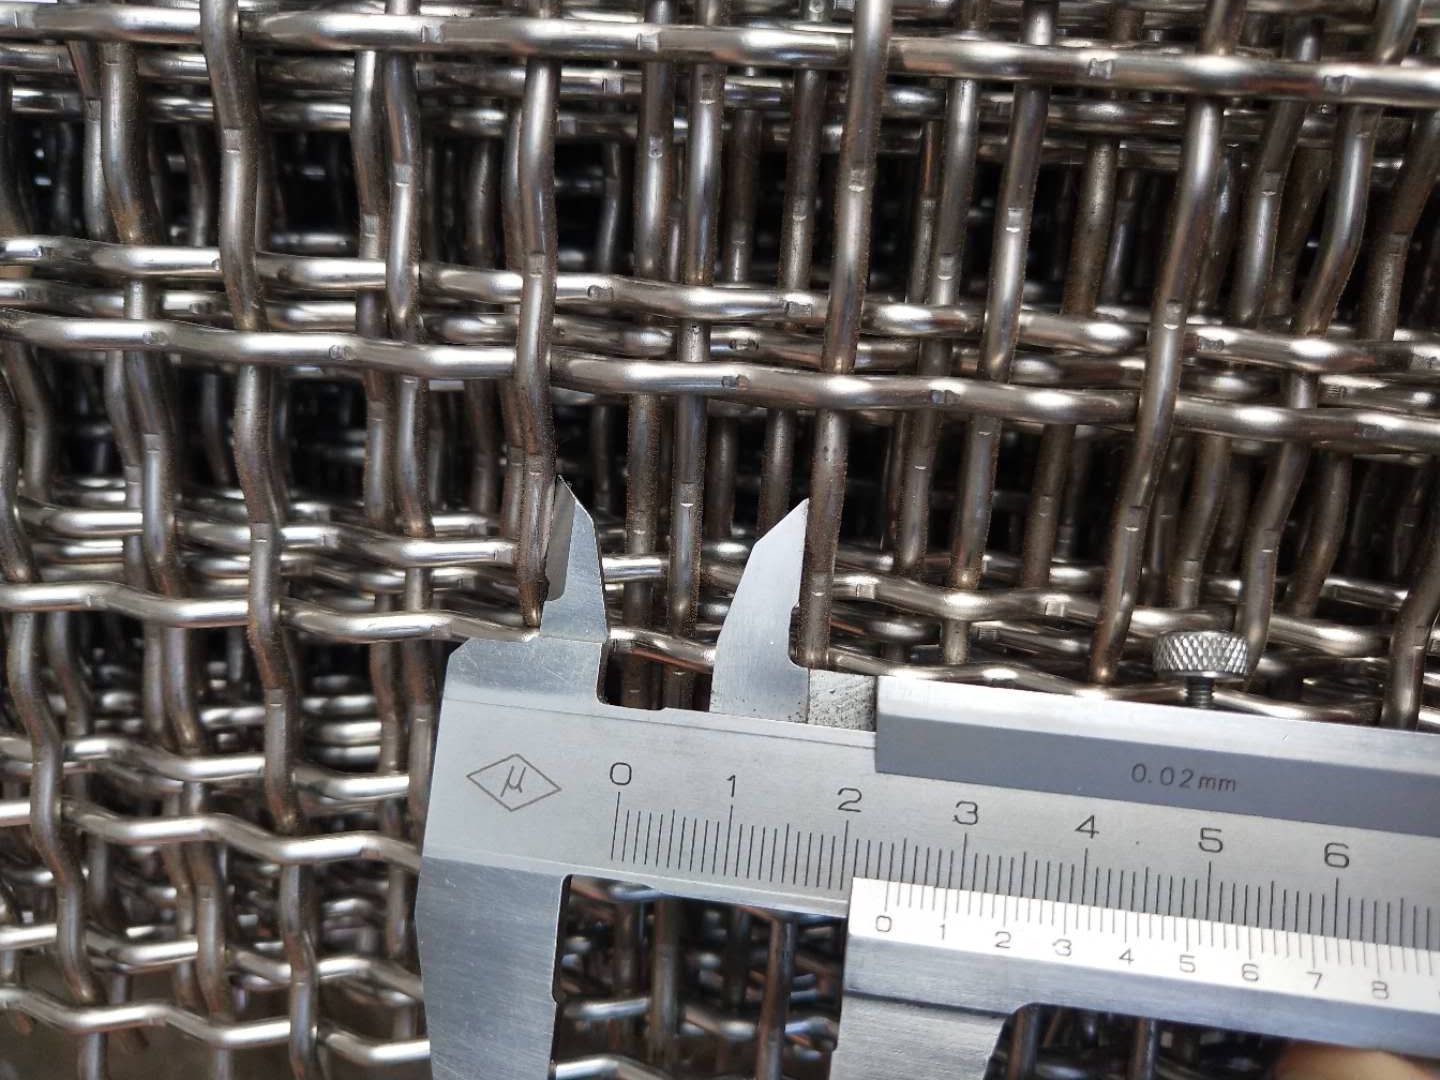 Wire mesh stainless  steel 304 mesh 26 X 26 width 1800mm length 30mWire Mesh Opening 24mm x 24mm Wire Diameter 3mm Width 1100mm Length 2650mm Stainless Steel 304